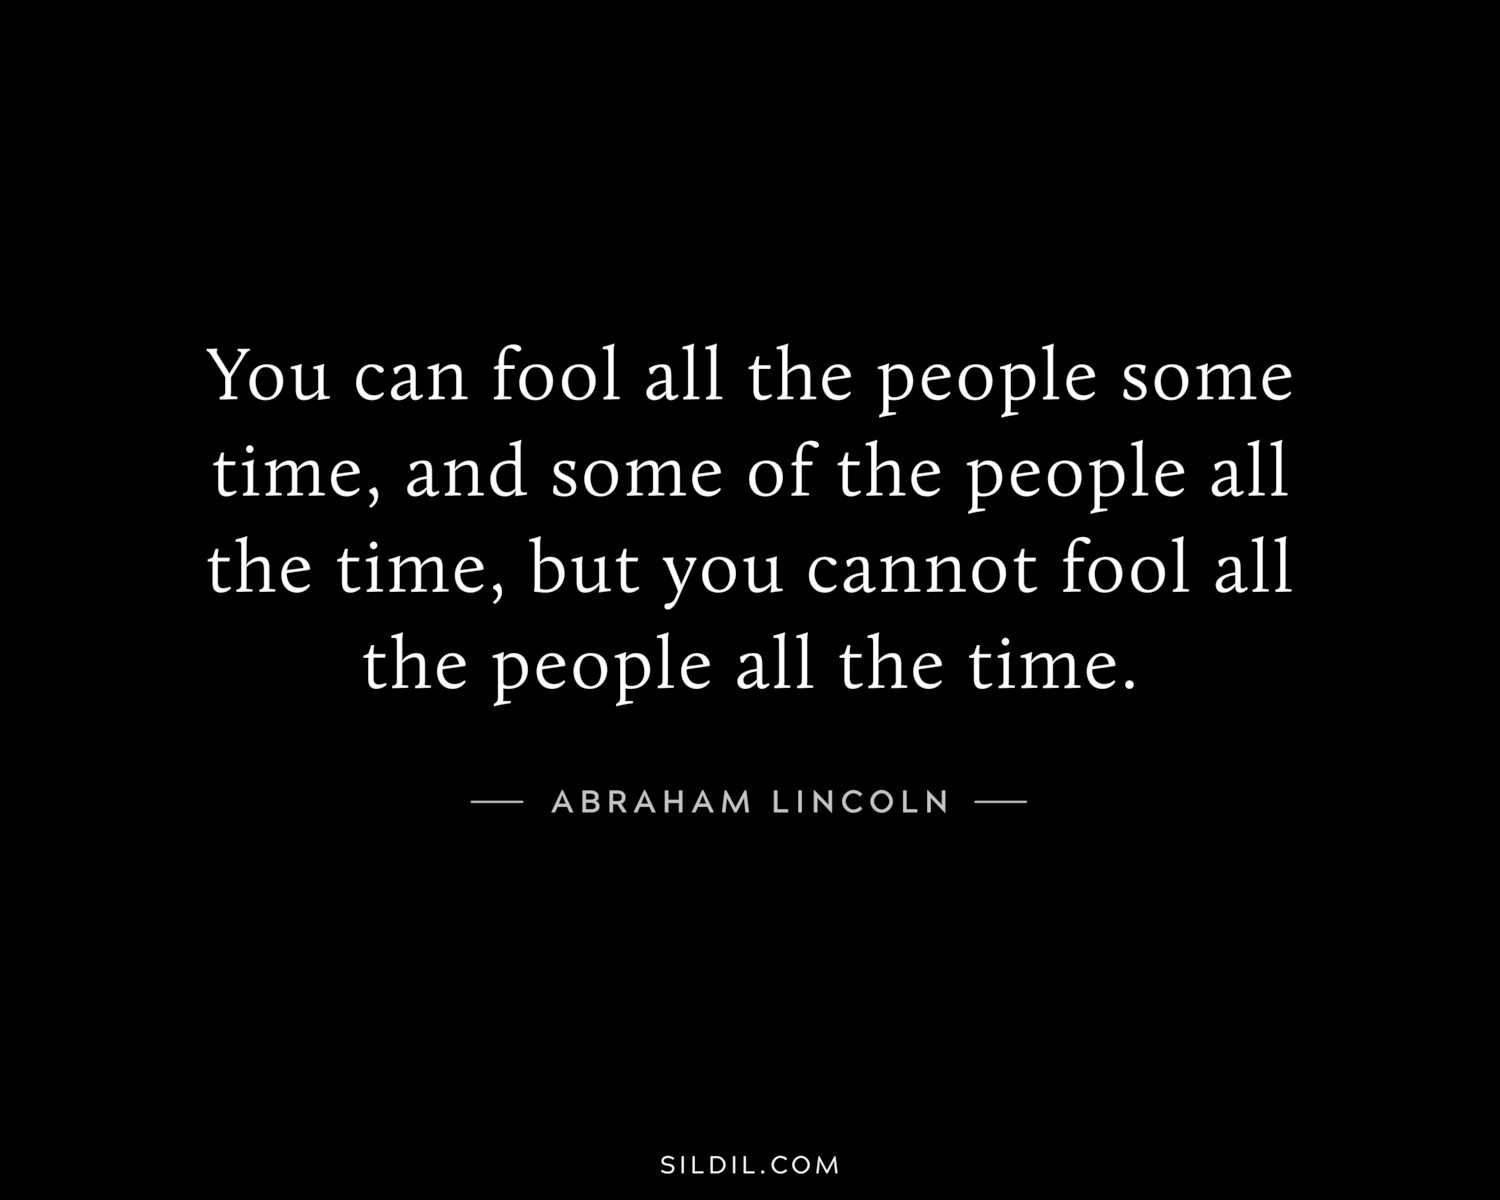 You can fool all the people some time, and some of the people all the time, but you cannot fool all the people all the time.